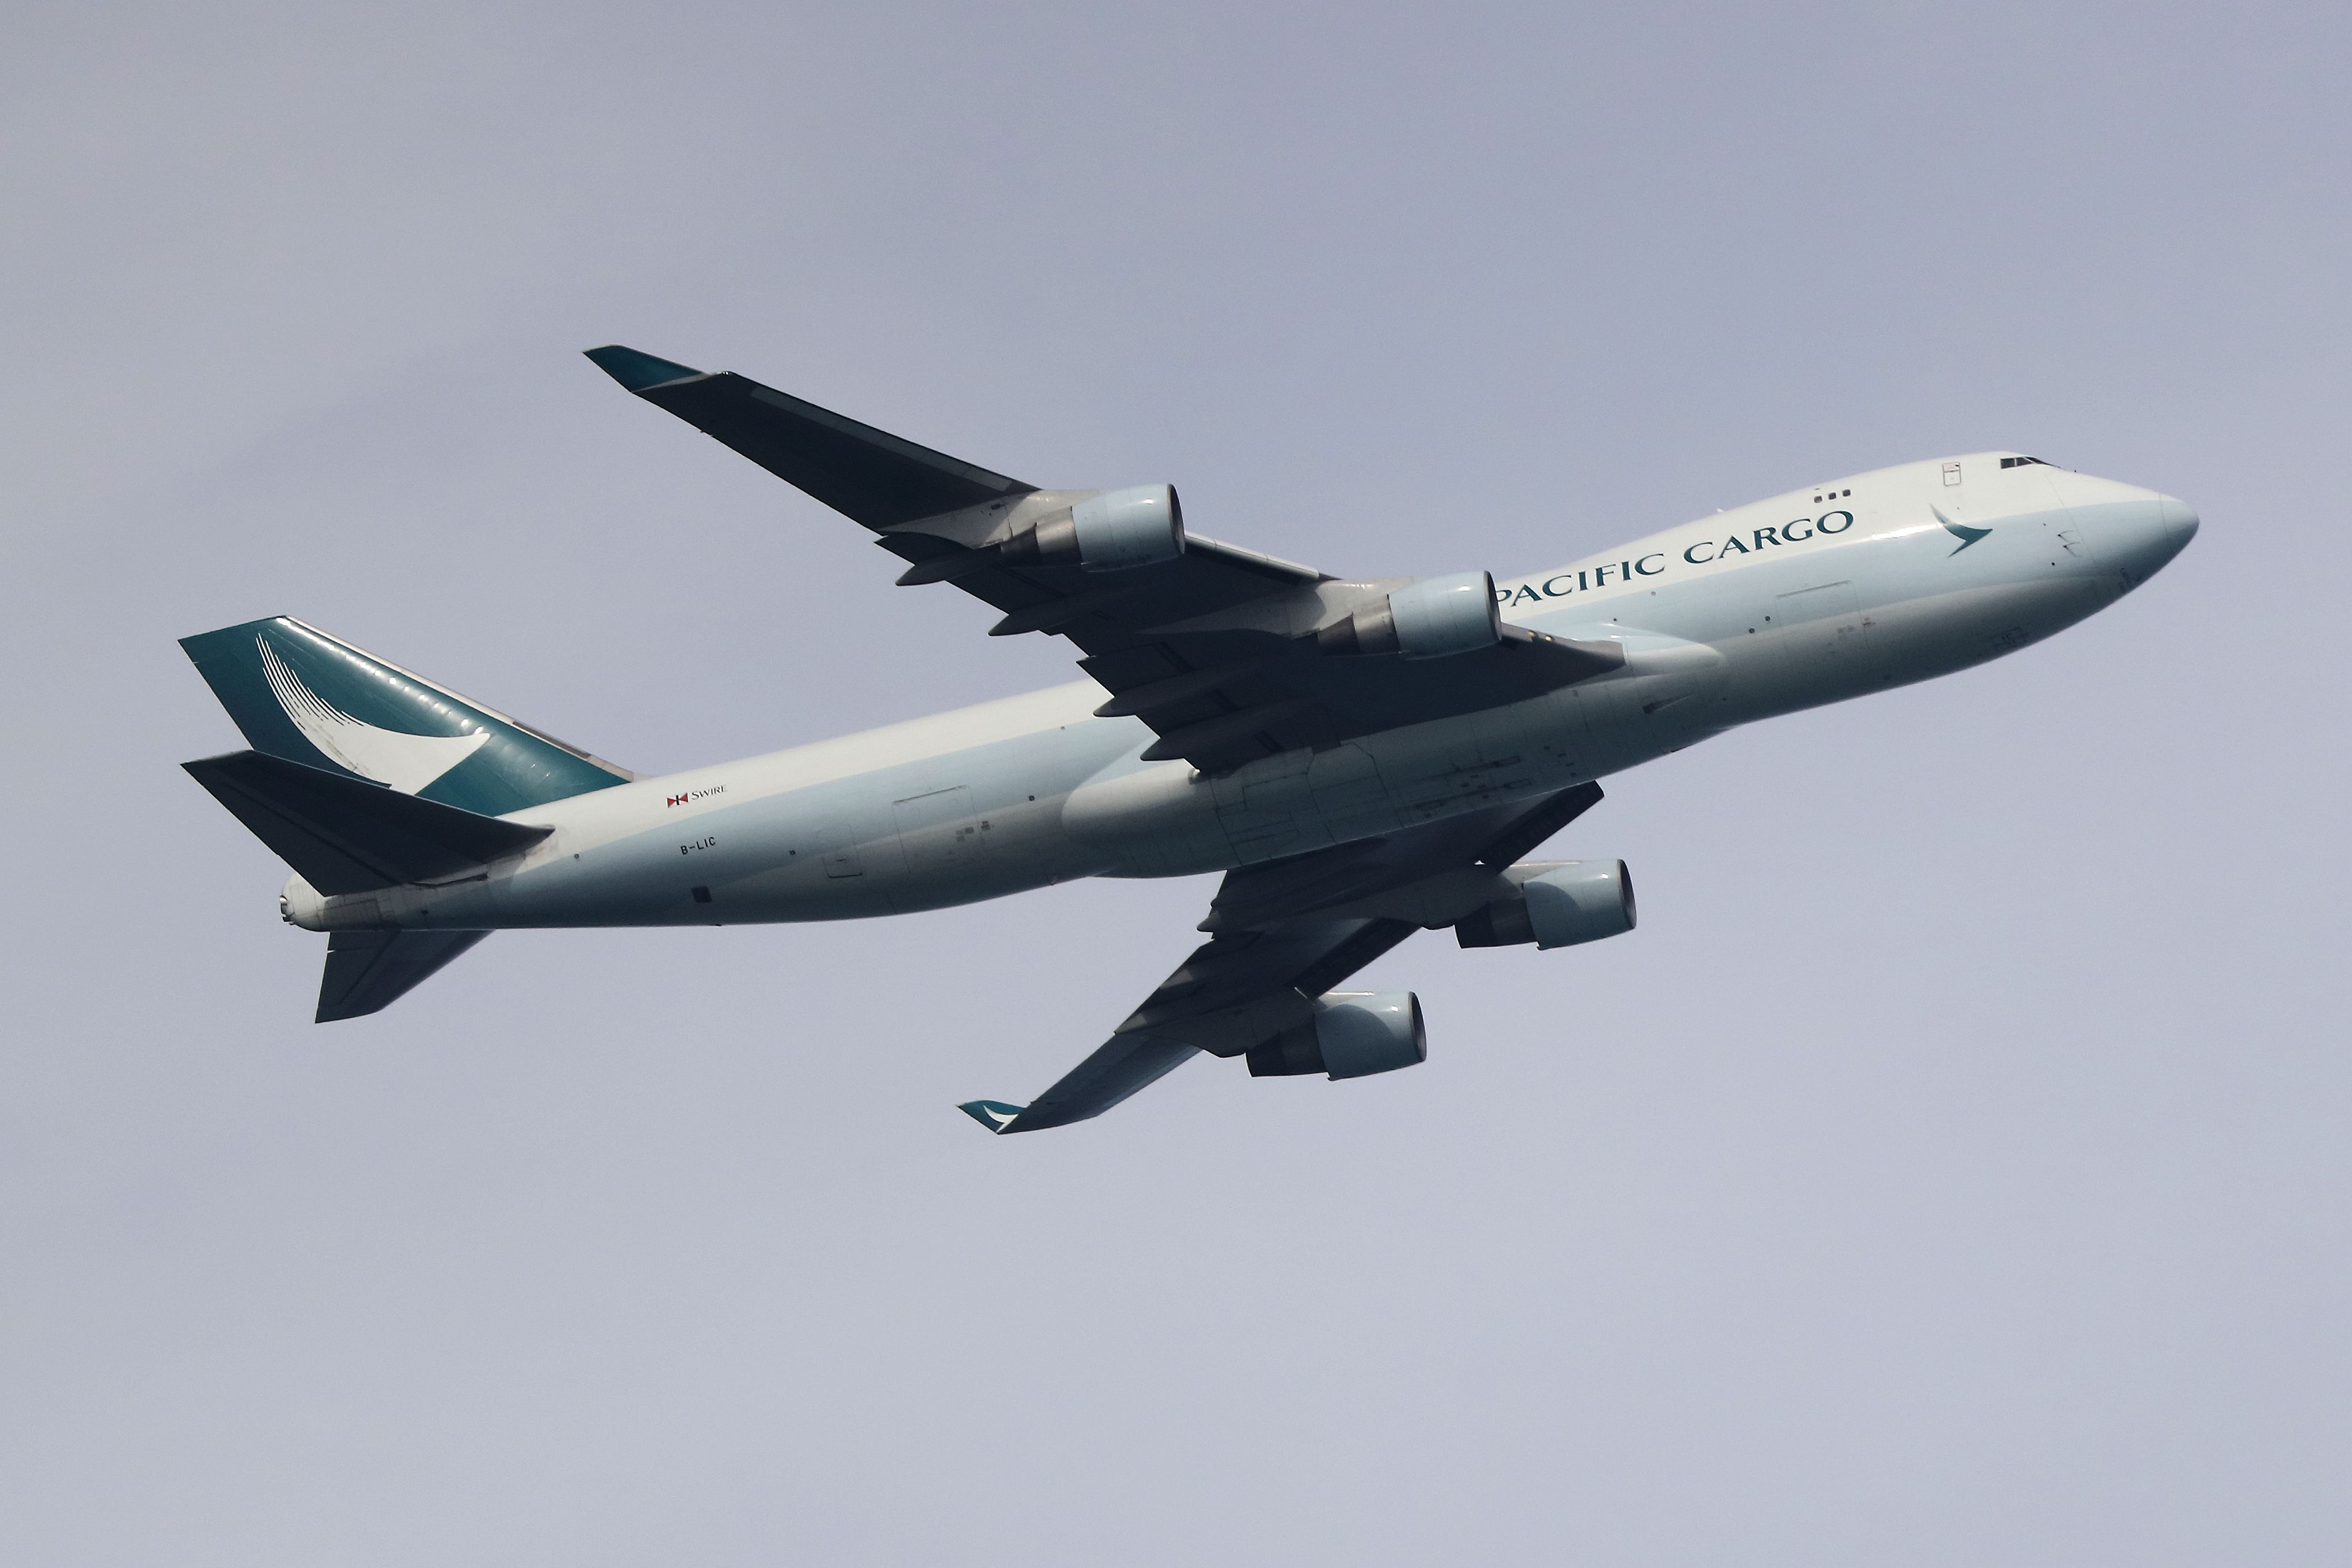 Cathay Pacific Cargo aircraft, Boeing B747-467F(ER)